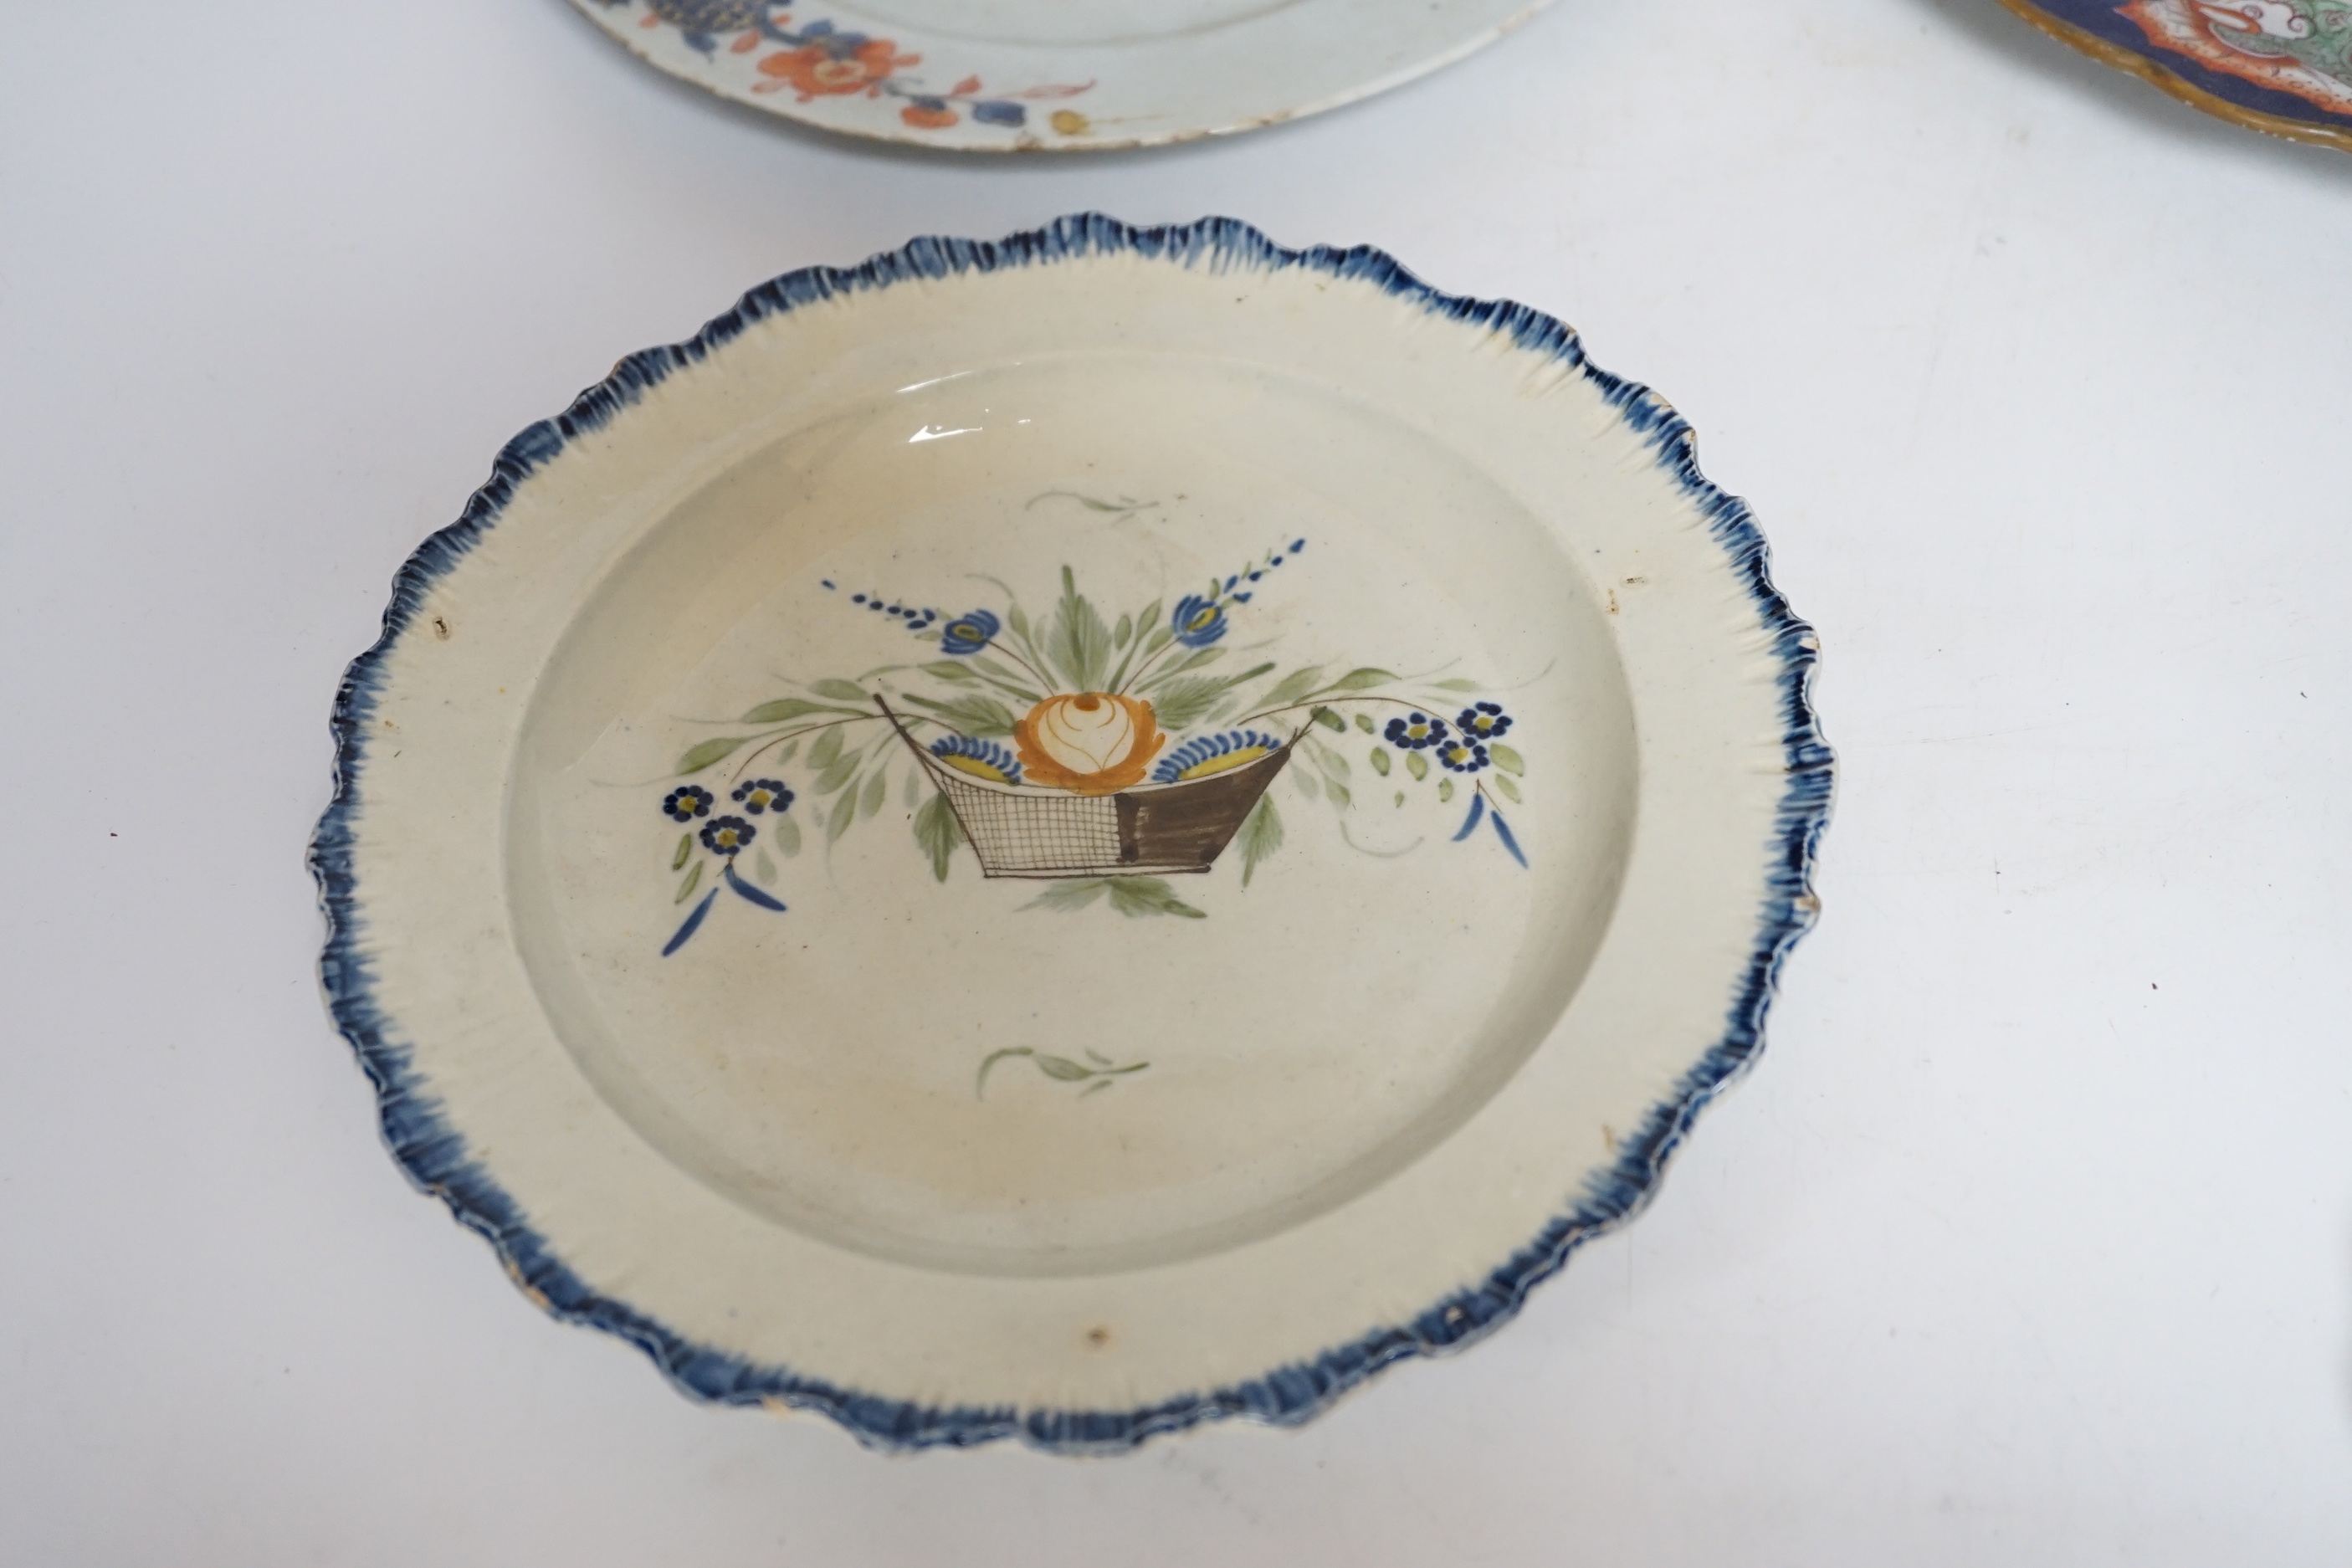 Two late 18th century pearlware Prattware plates, a Chinese export plate and an ironstone plate, largest 27cm in diameter